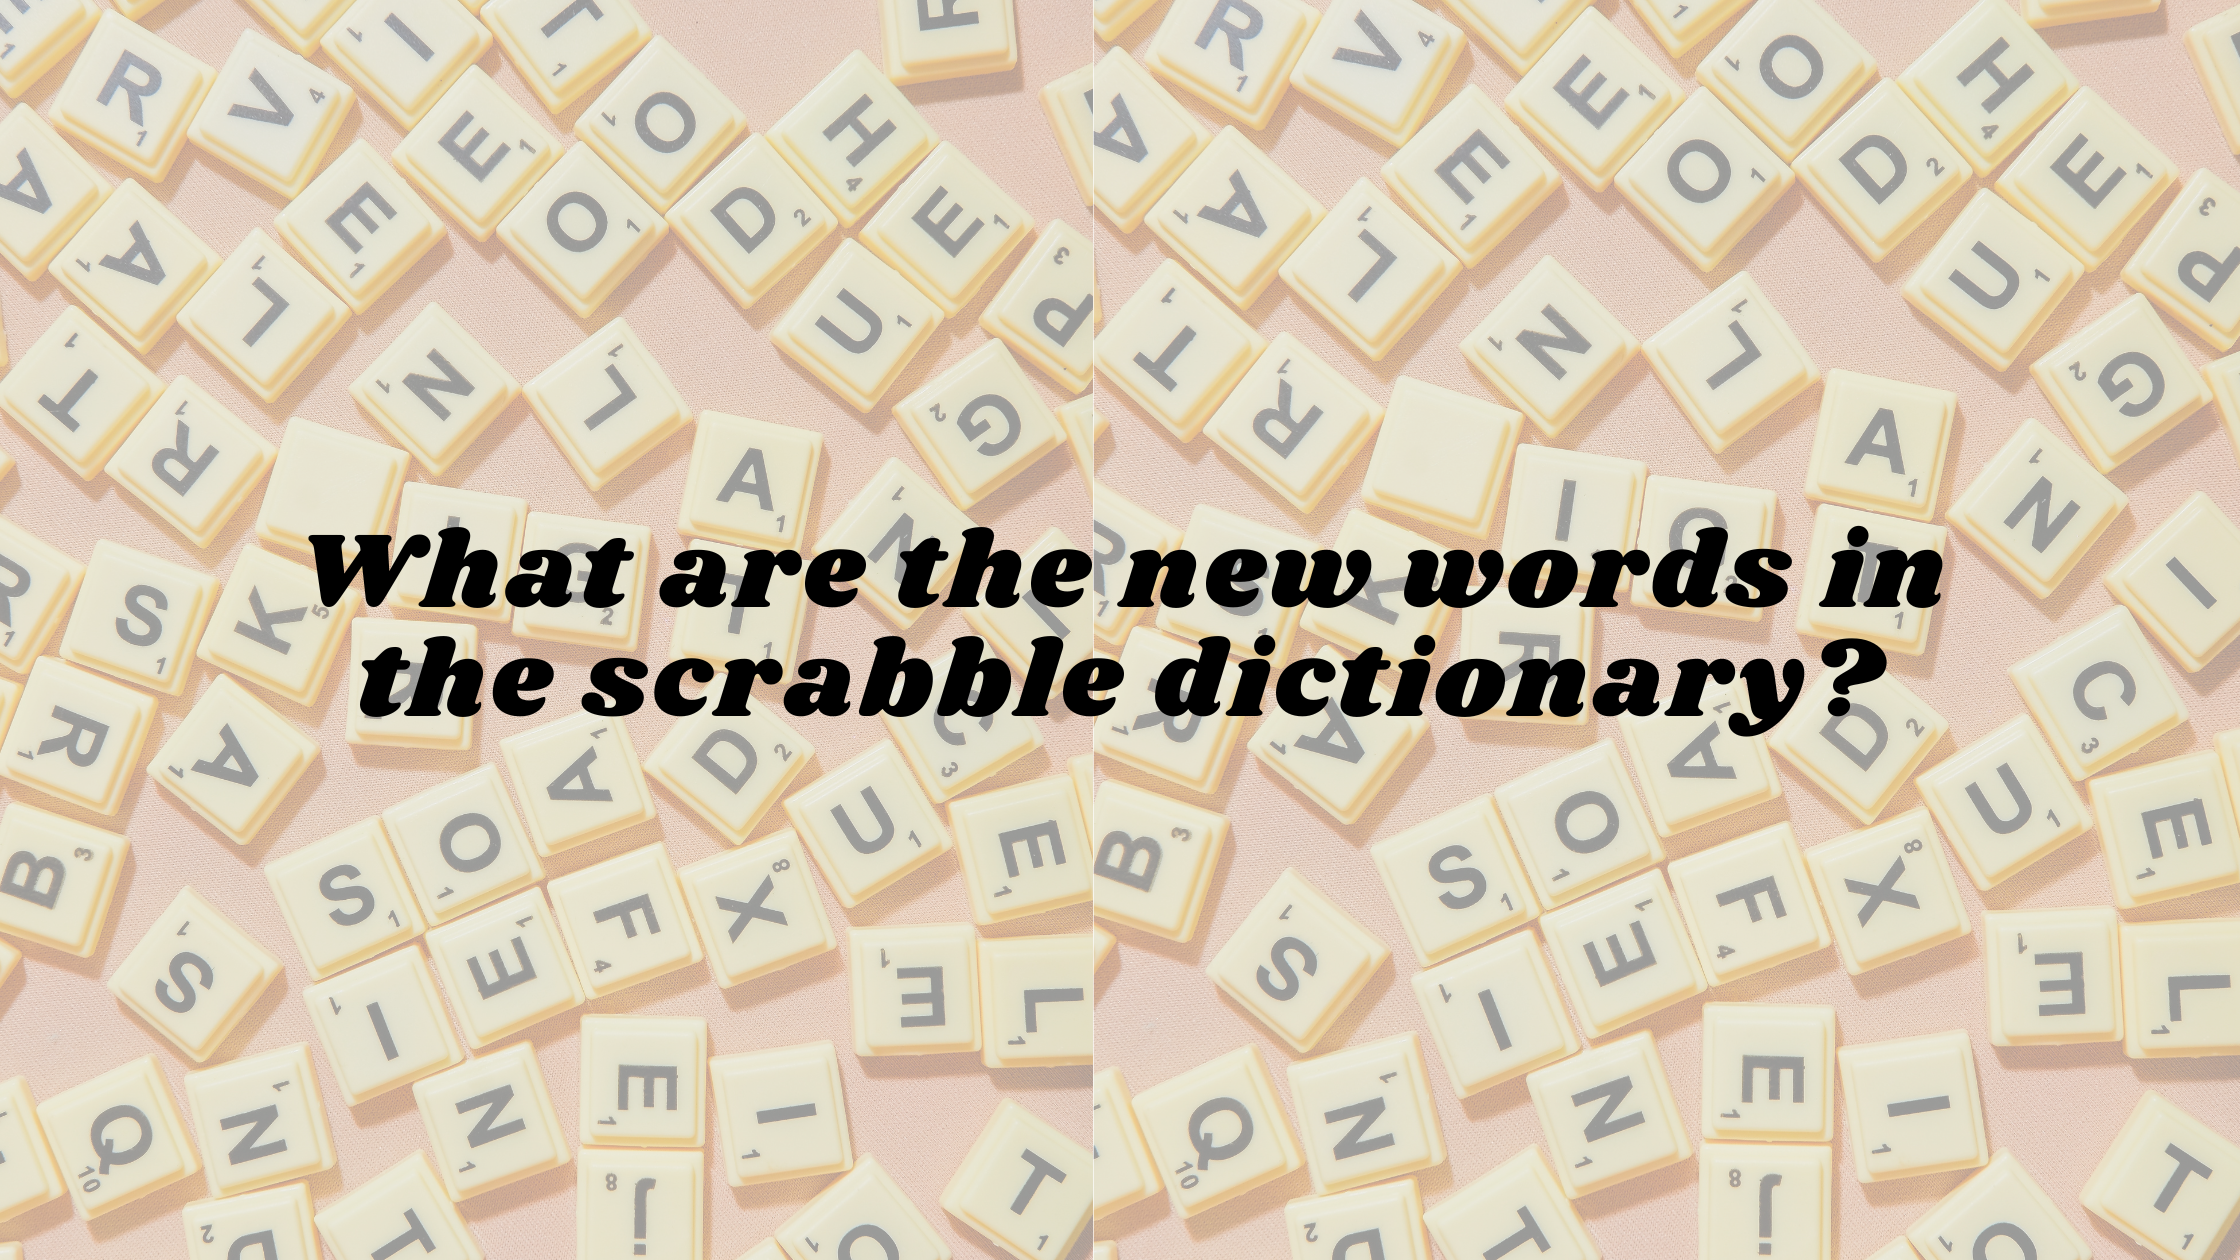 What are the new words in the Scrabble dictionary?